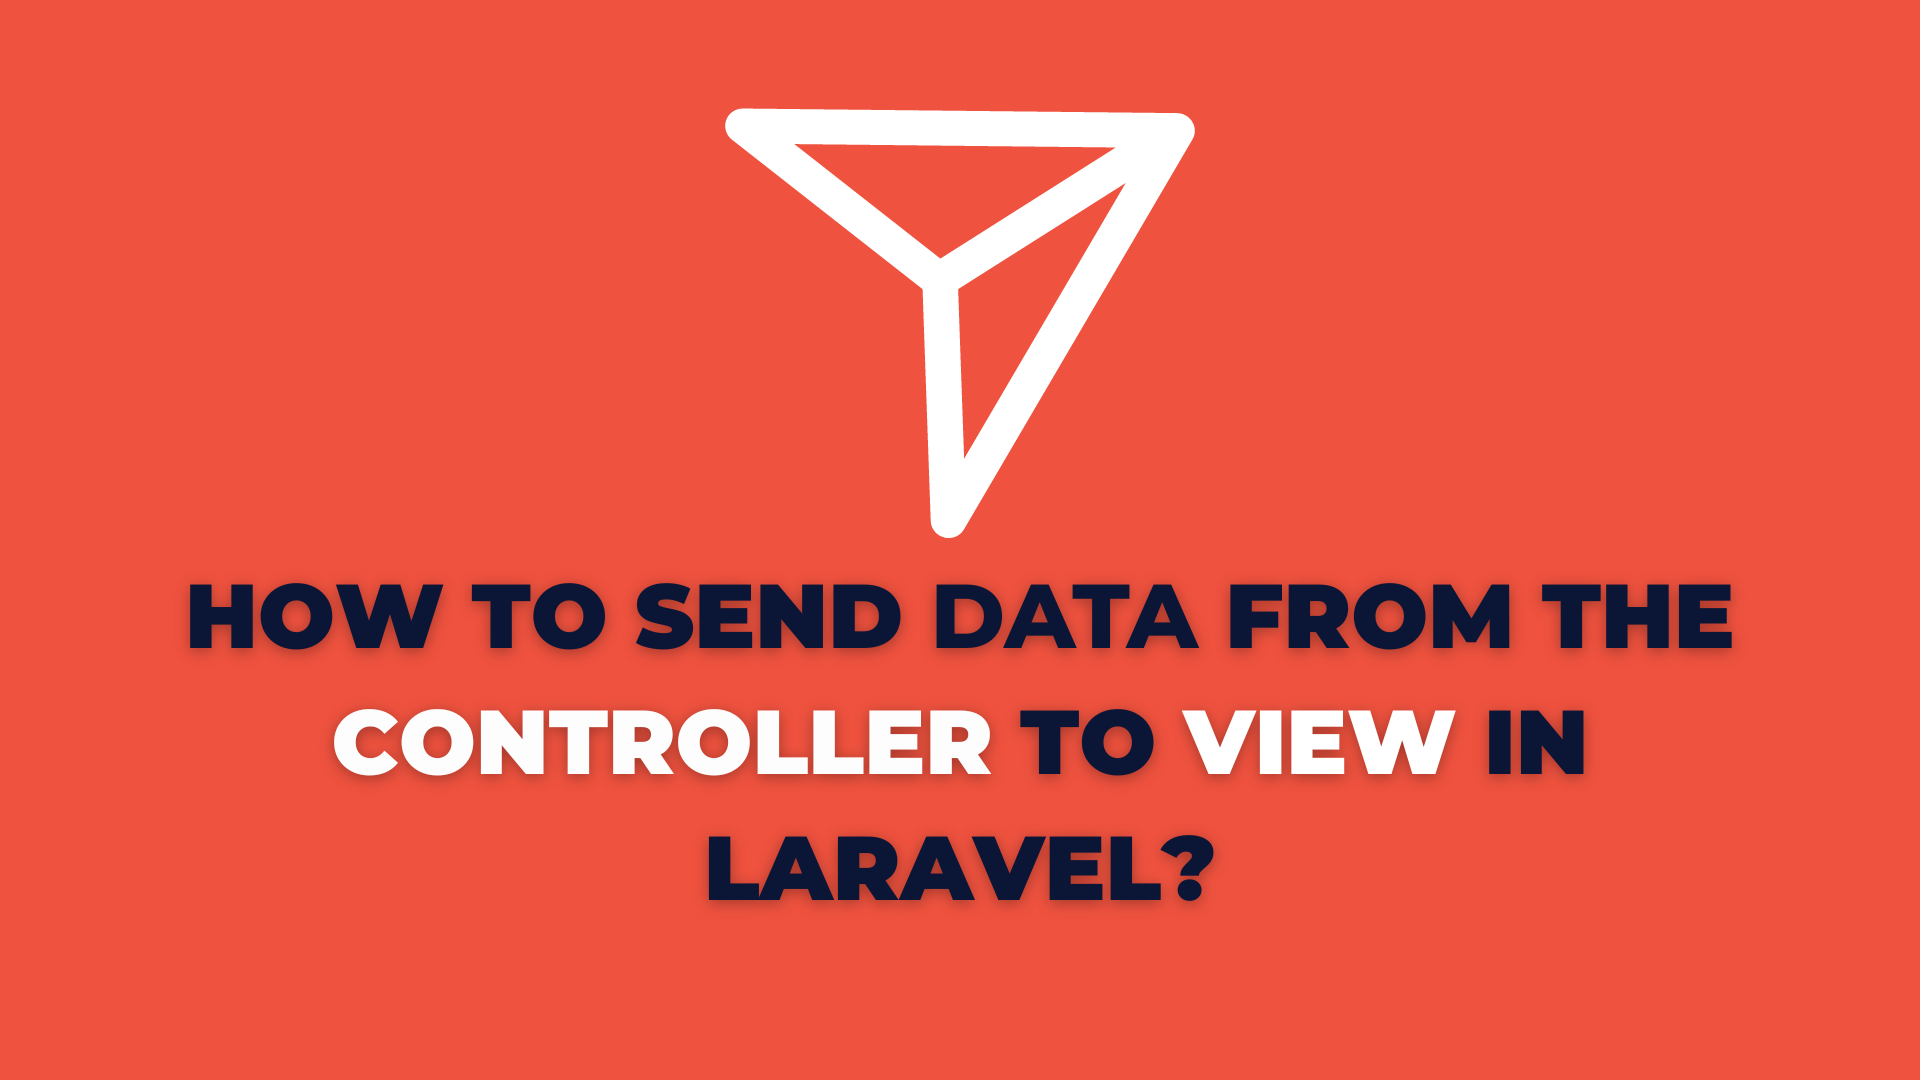 How to send Data from the Controller to View in Laravel?